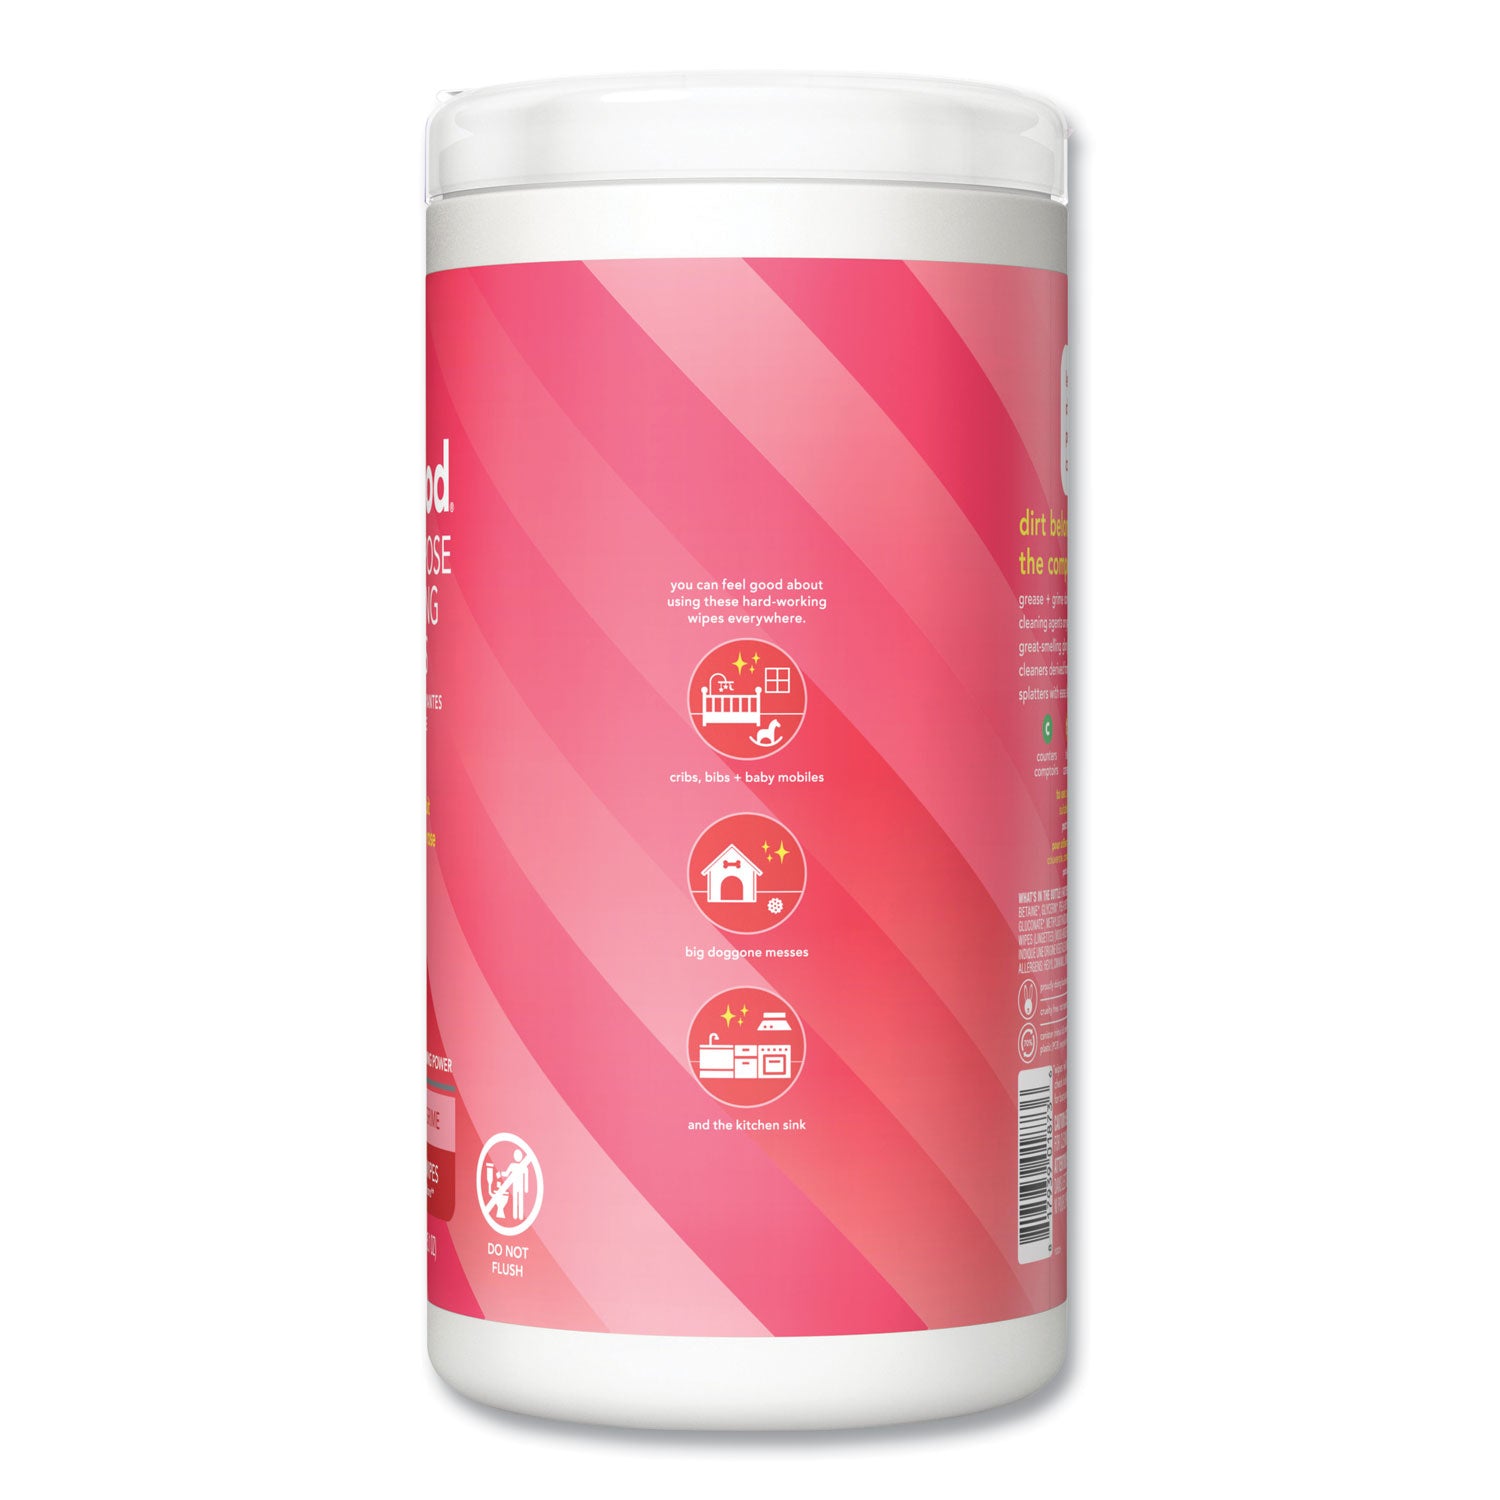 all-purpose-cleaning-wipes-1-ply-pink-grapefruit-white-70-canister-6-carton_mth338527 - 3